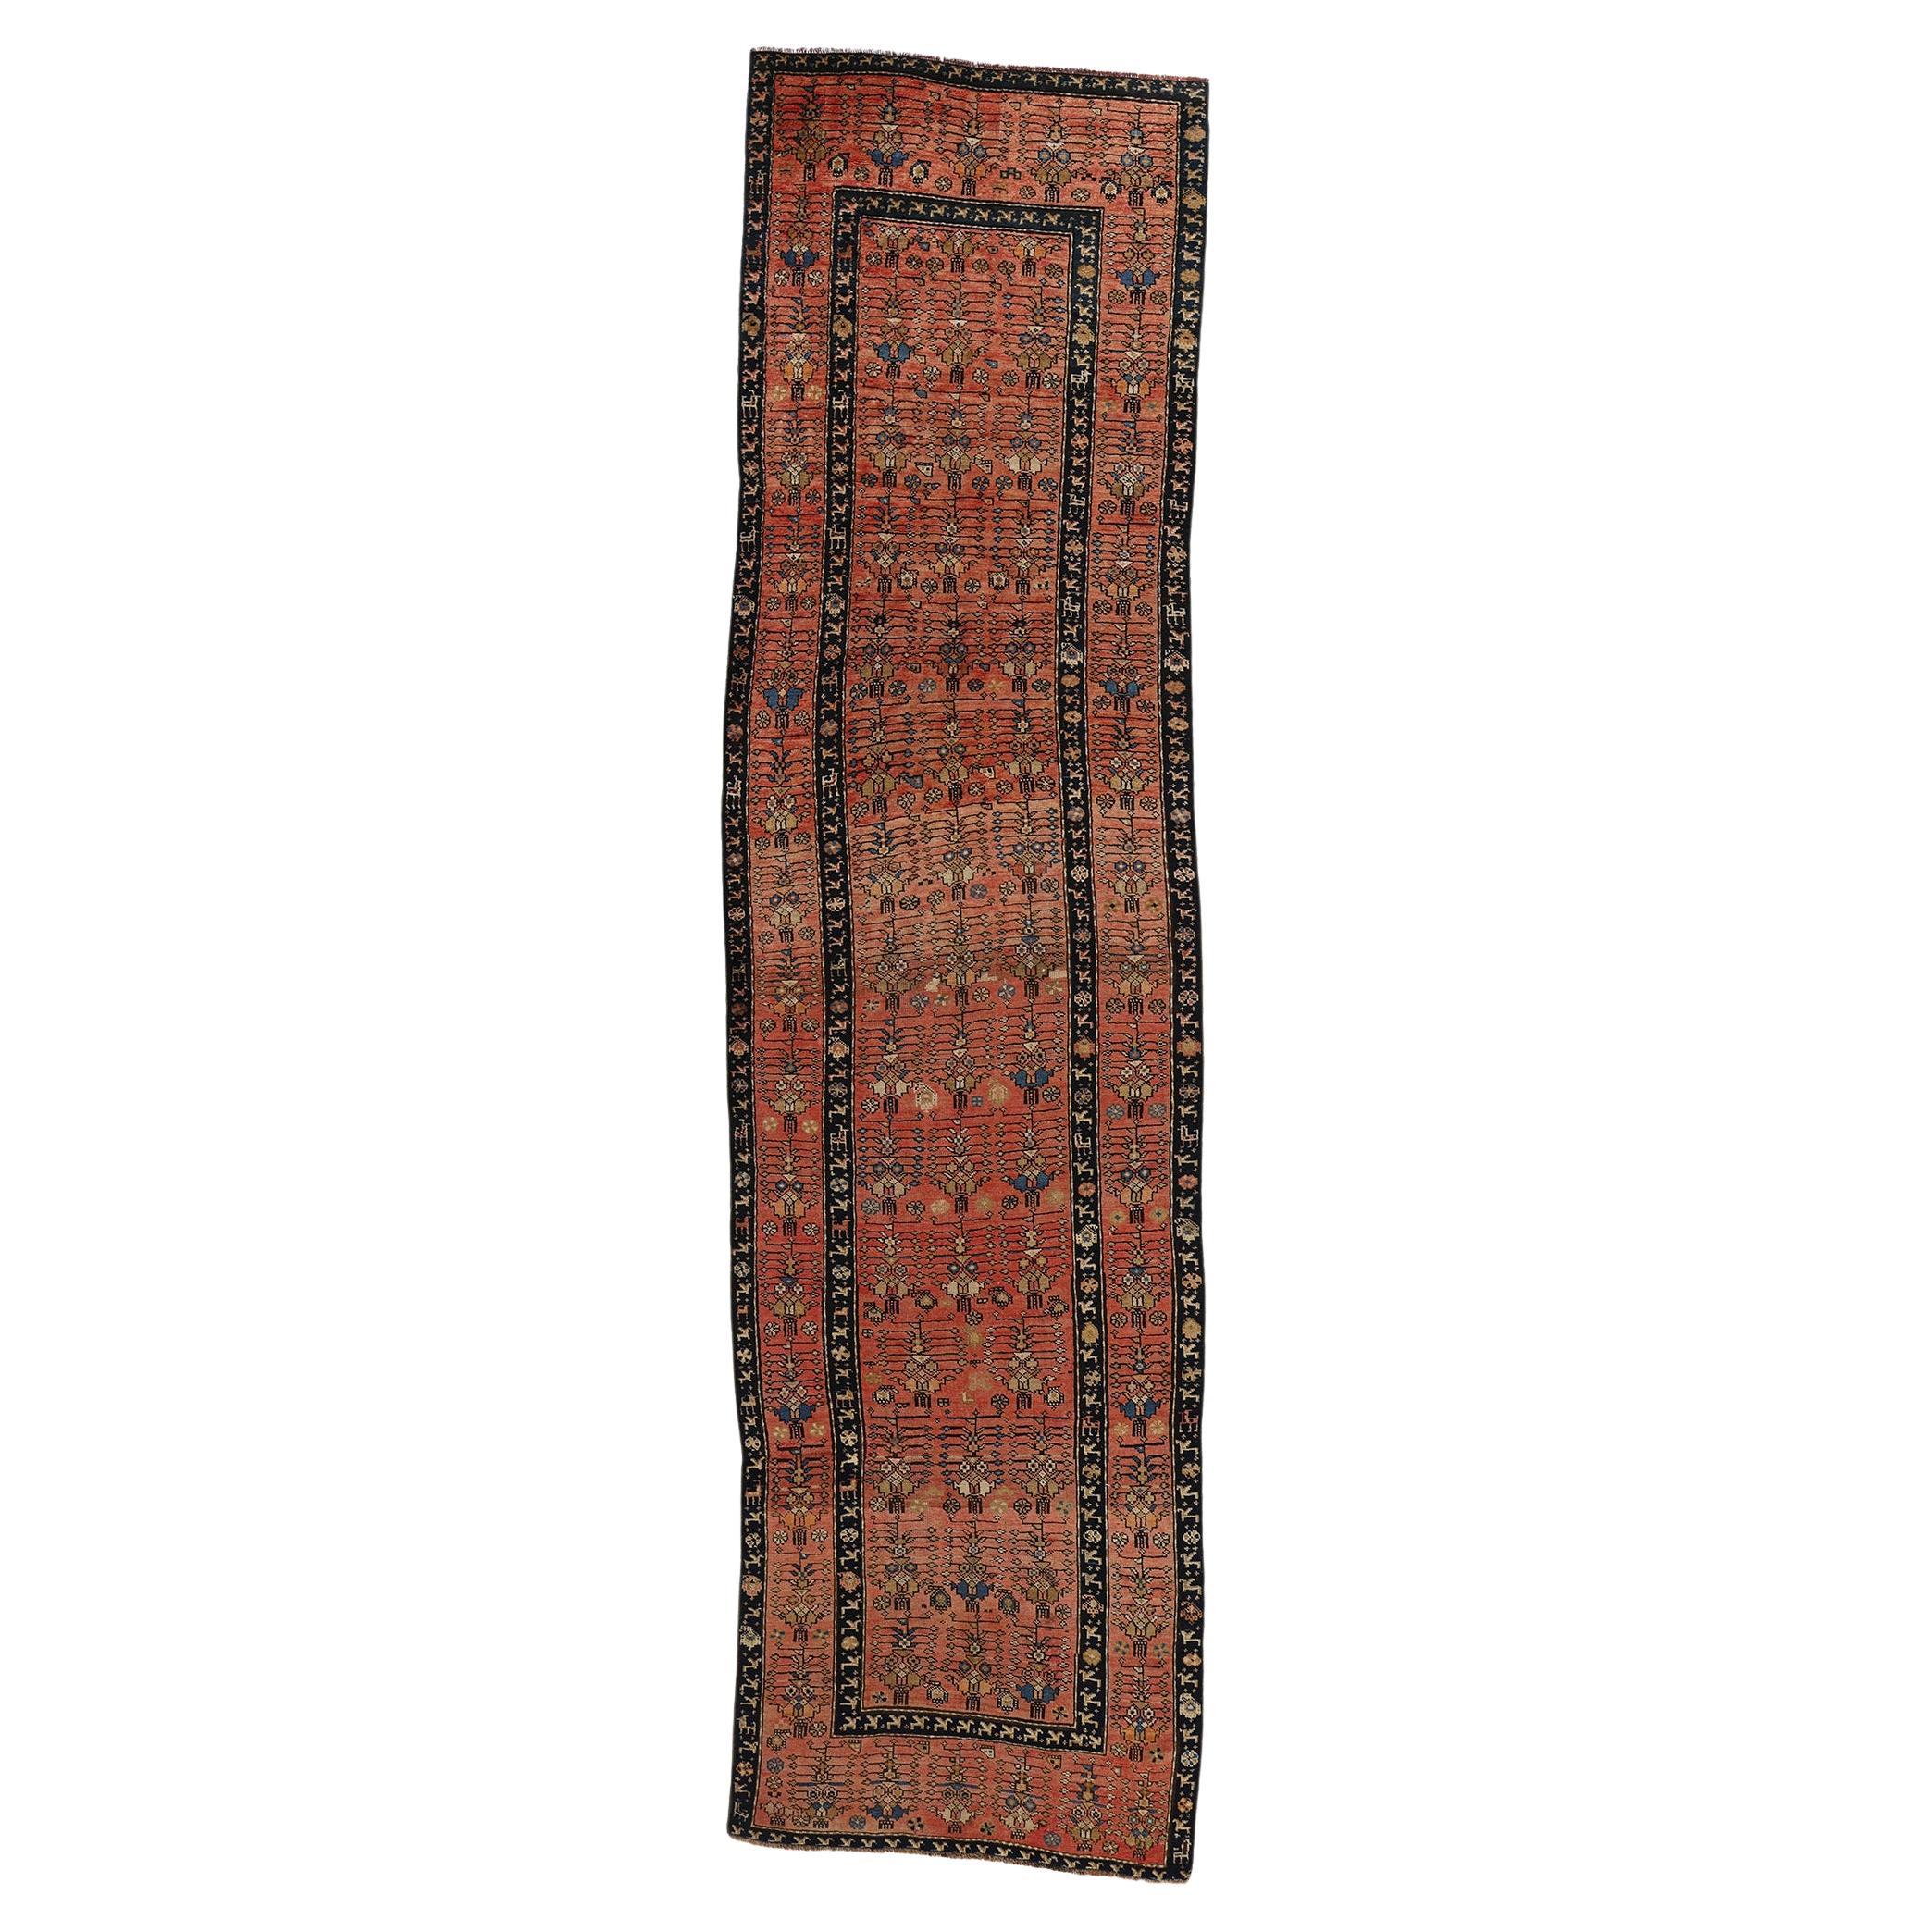 Early 20th Century Antique Red Caucasian Karabagh Carpet Runner For Sale